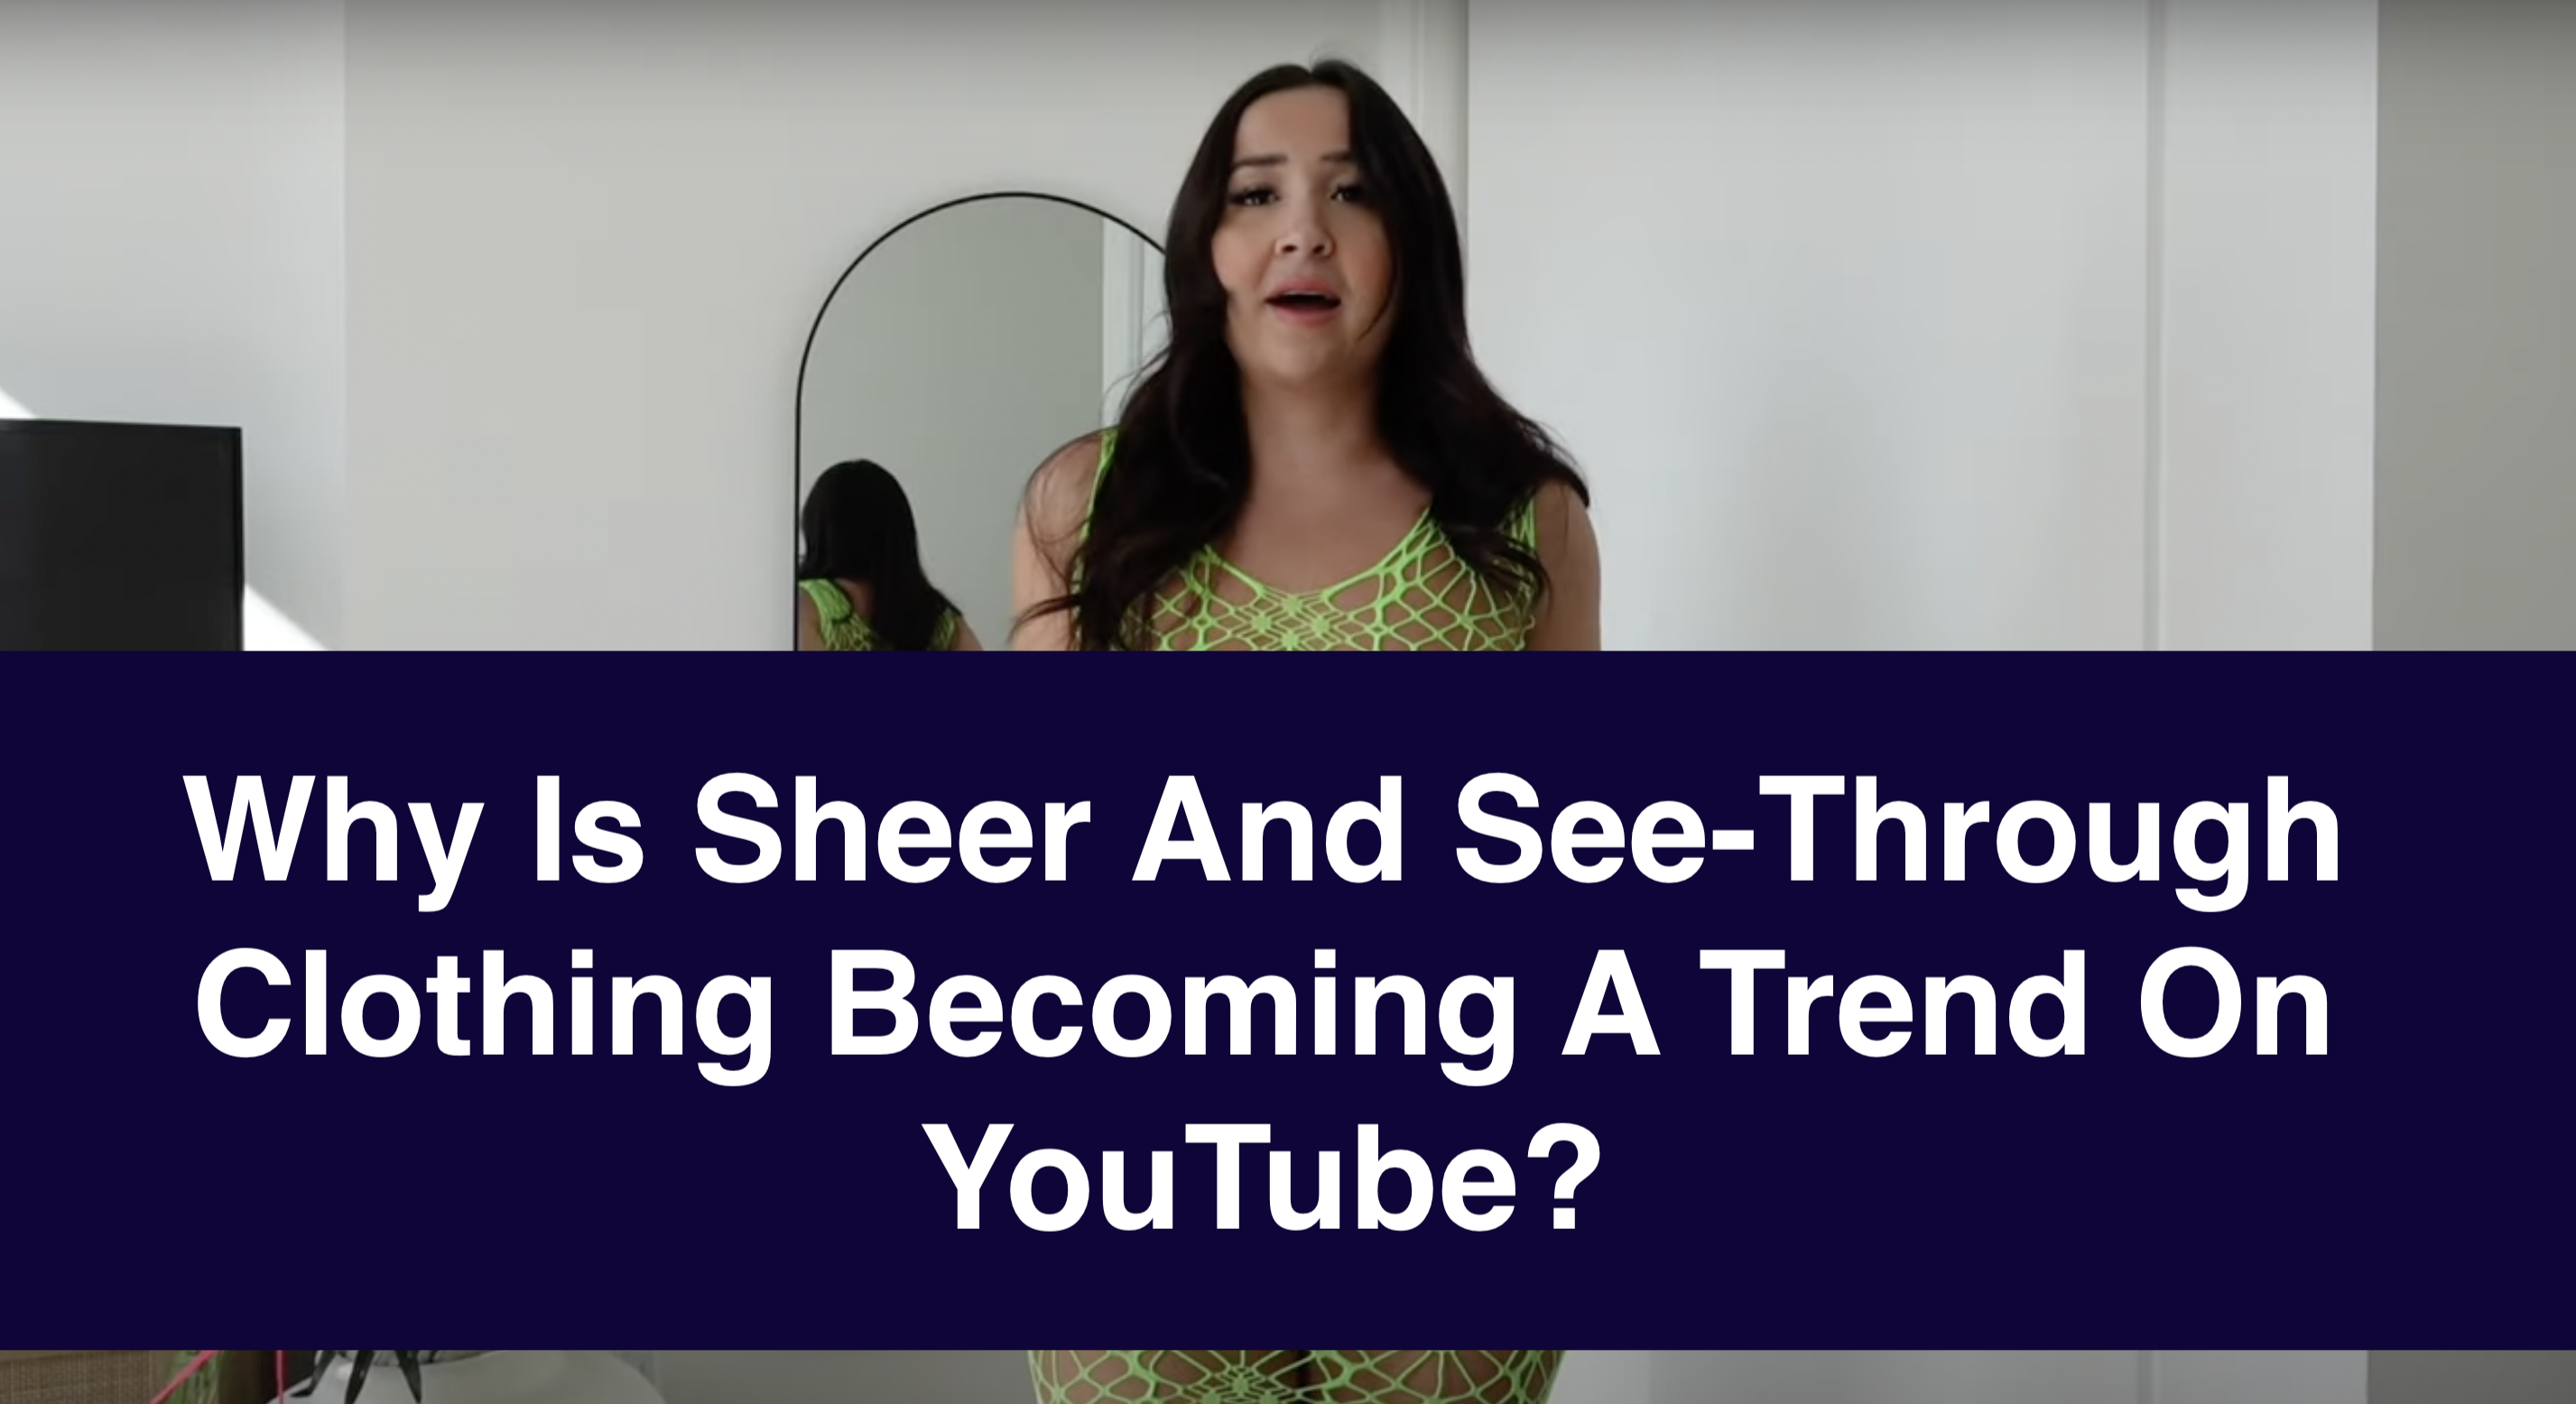 Why Is 'Sheer And See Through Clothing' Suddenly A Trend On YouTube? A Controversial New Meta Explained